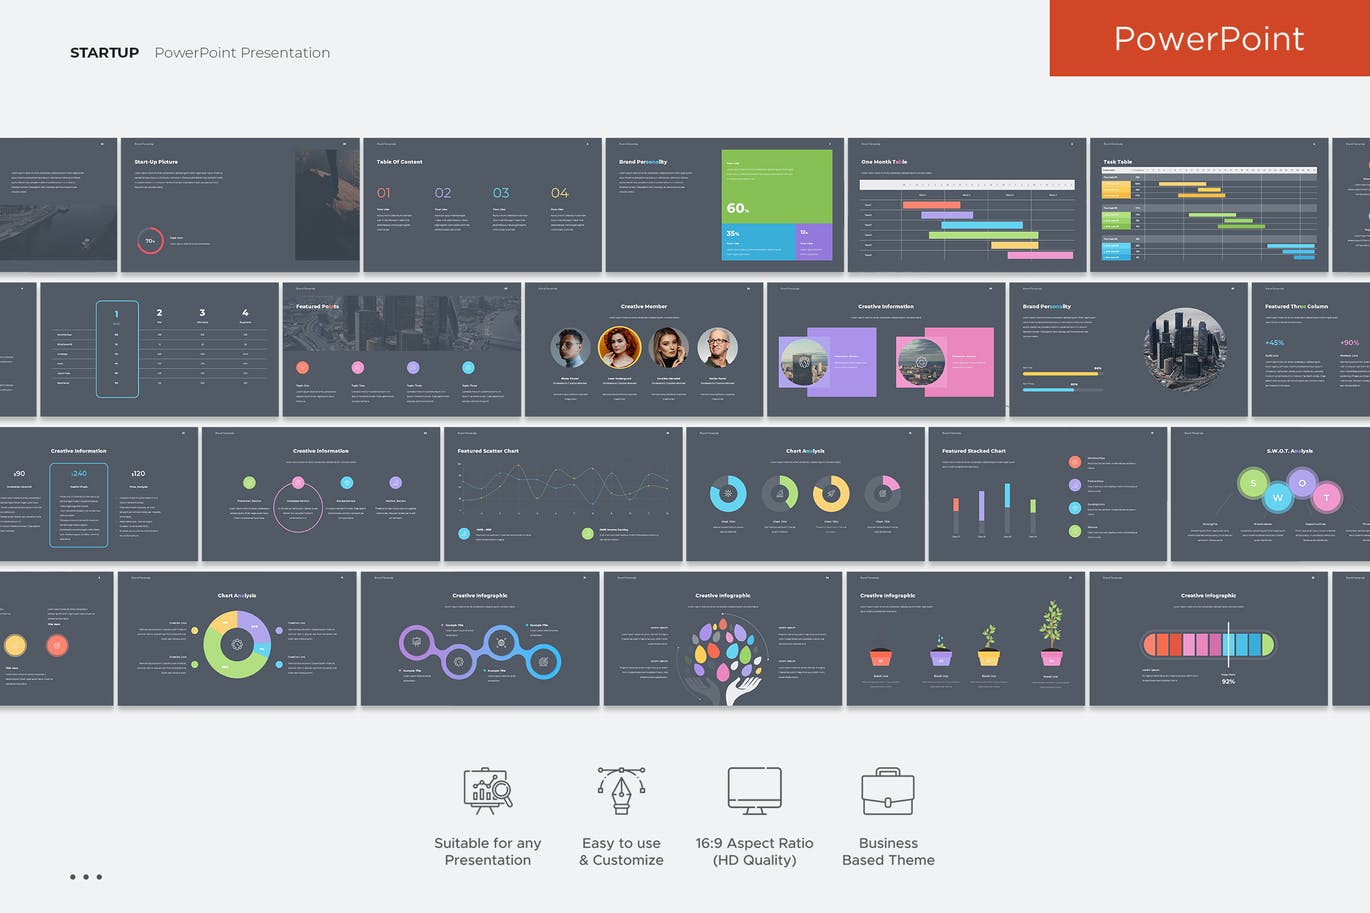 Ultimate PowerPoint Presentation for Startups